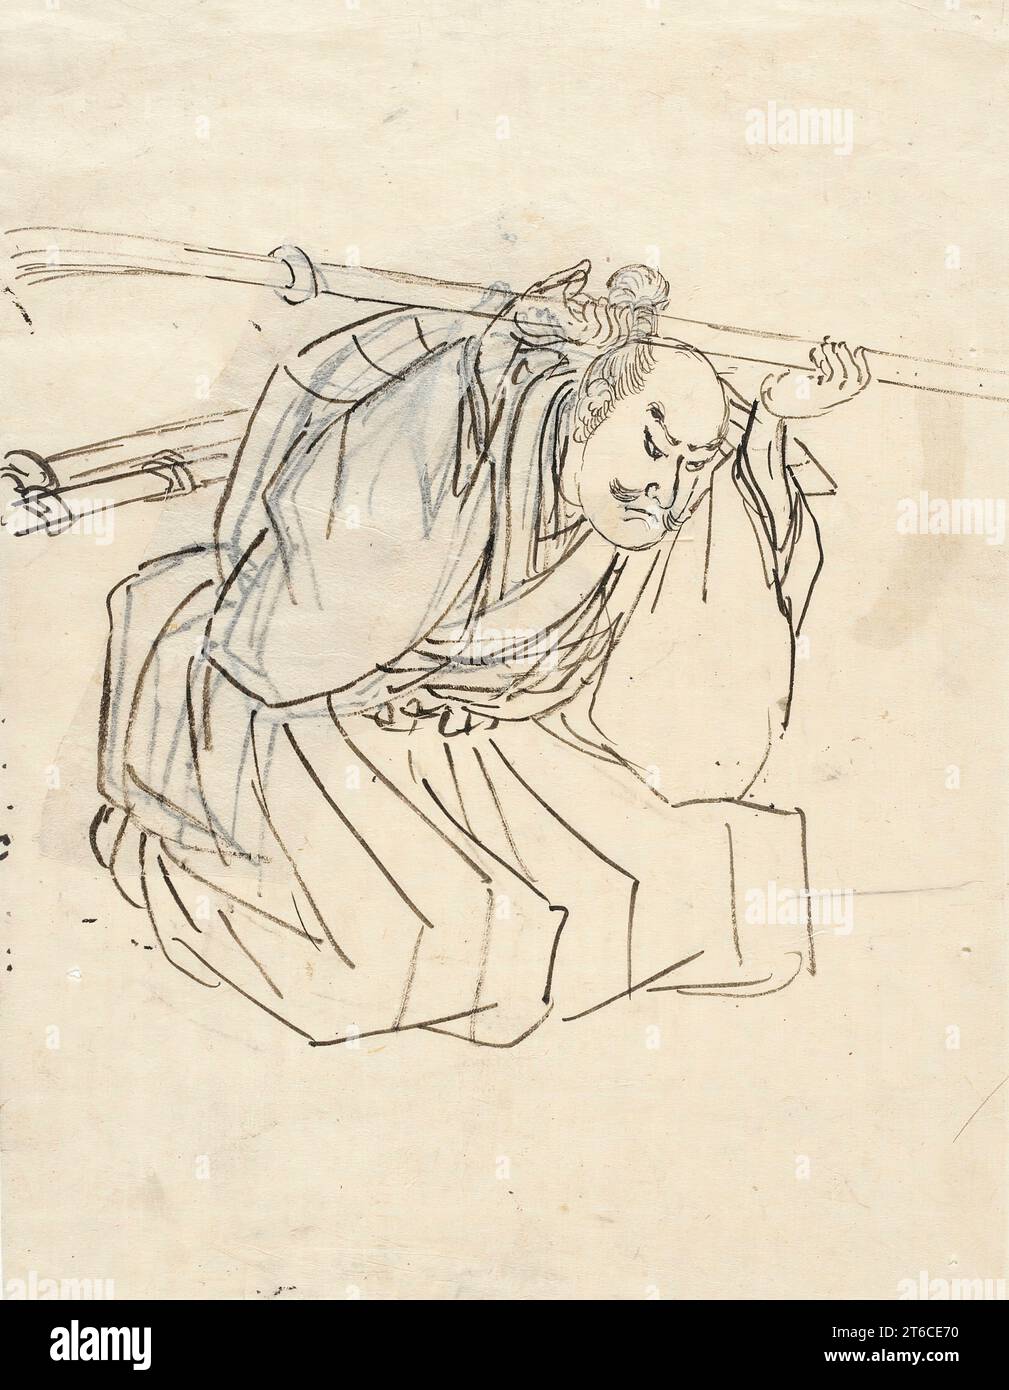 Shinano Sakon Tomoyuki, between 1848 and 1849. From Heroic Stories of the &quot;Chronicle of the Great Peace&quot;. Stock Photo